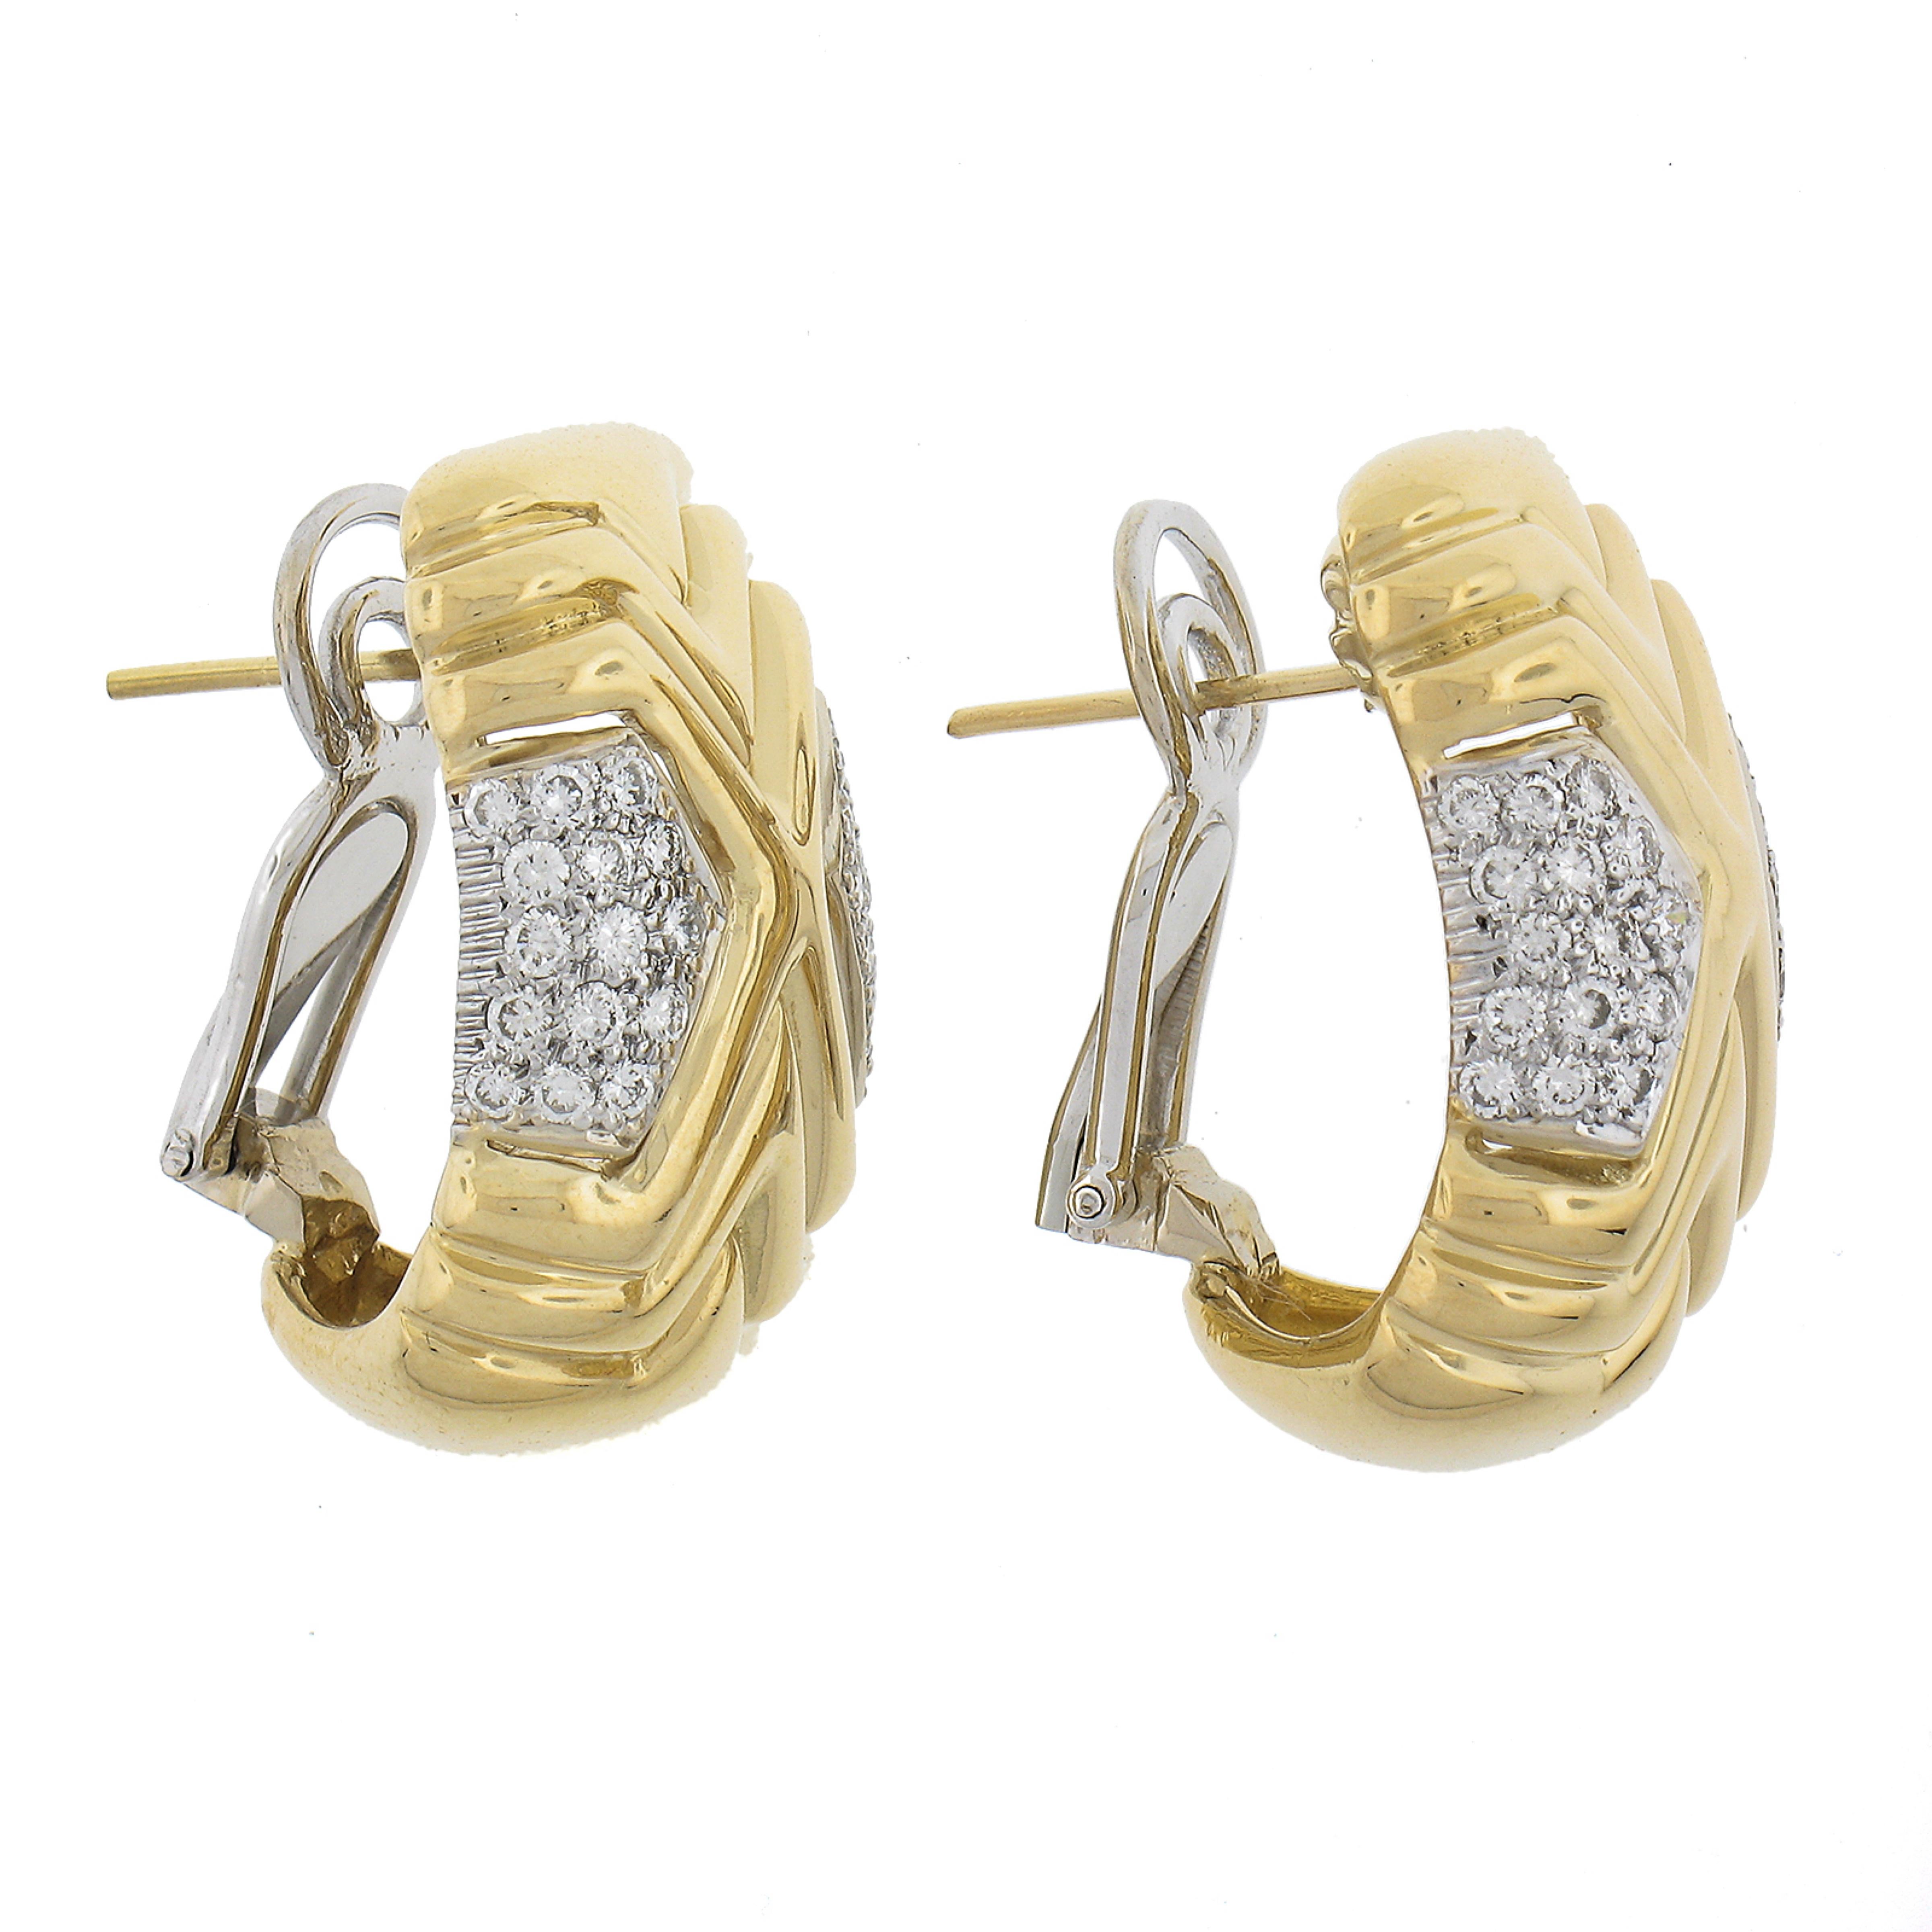 Roberto Casarin 18K TT Gold 0.60ctw Pave Set Diamond Wide Grooved Cuff Earrings In Excellent Condition For Sale In Montclair, NJ